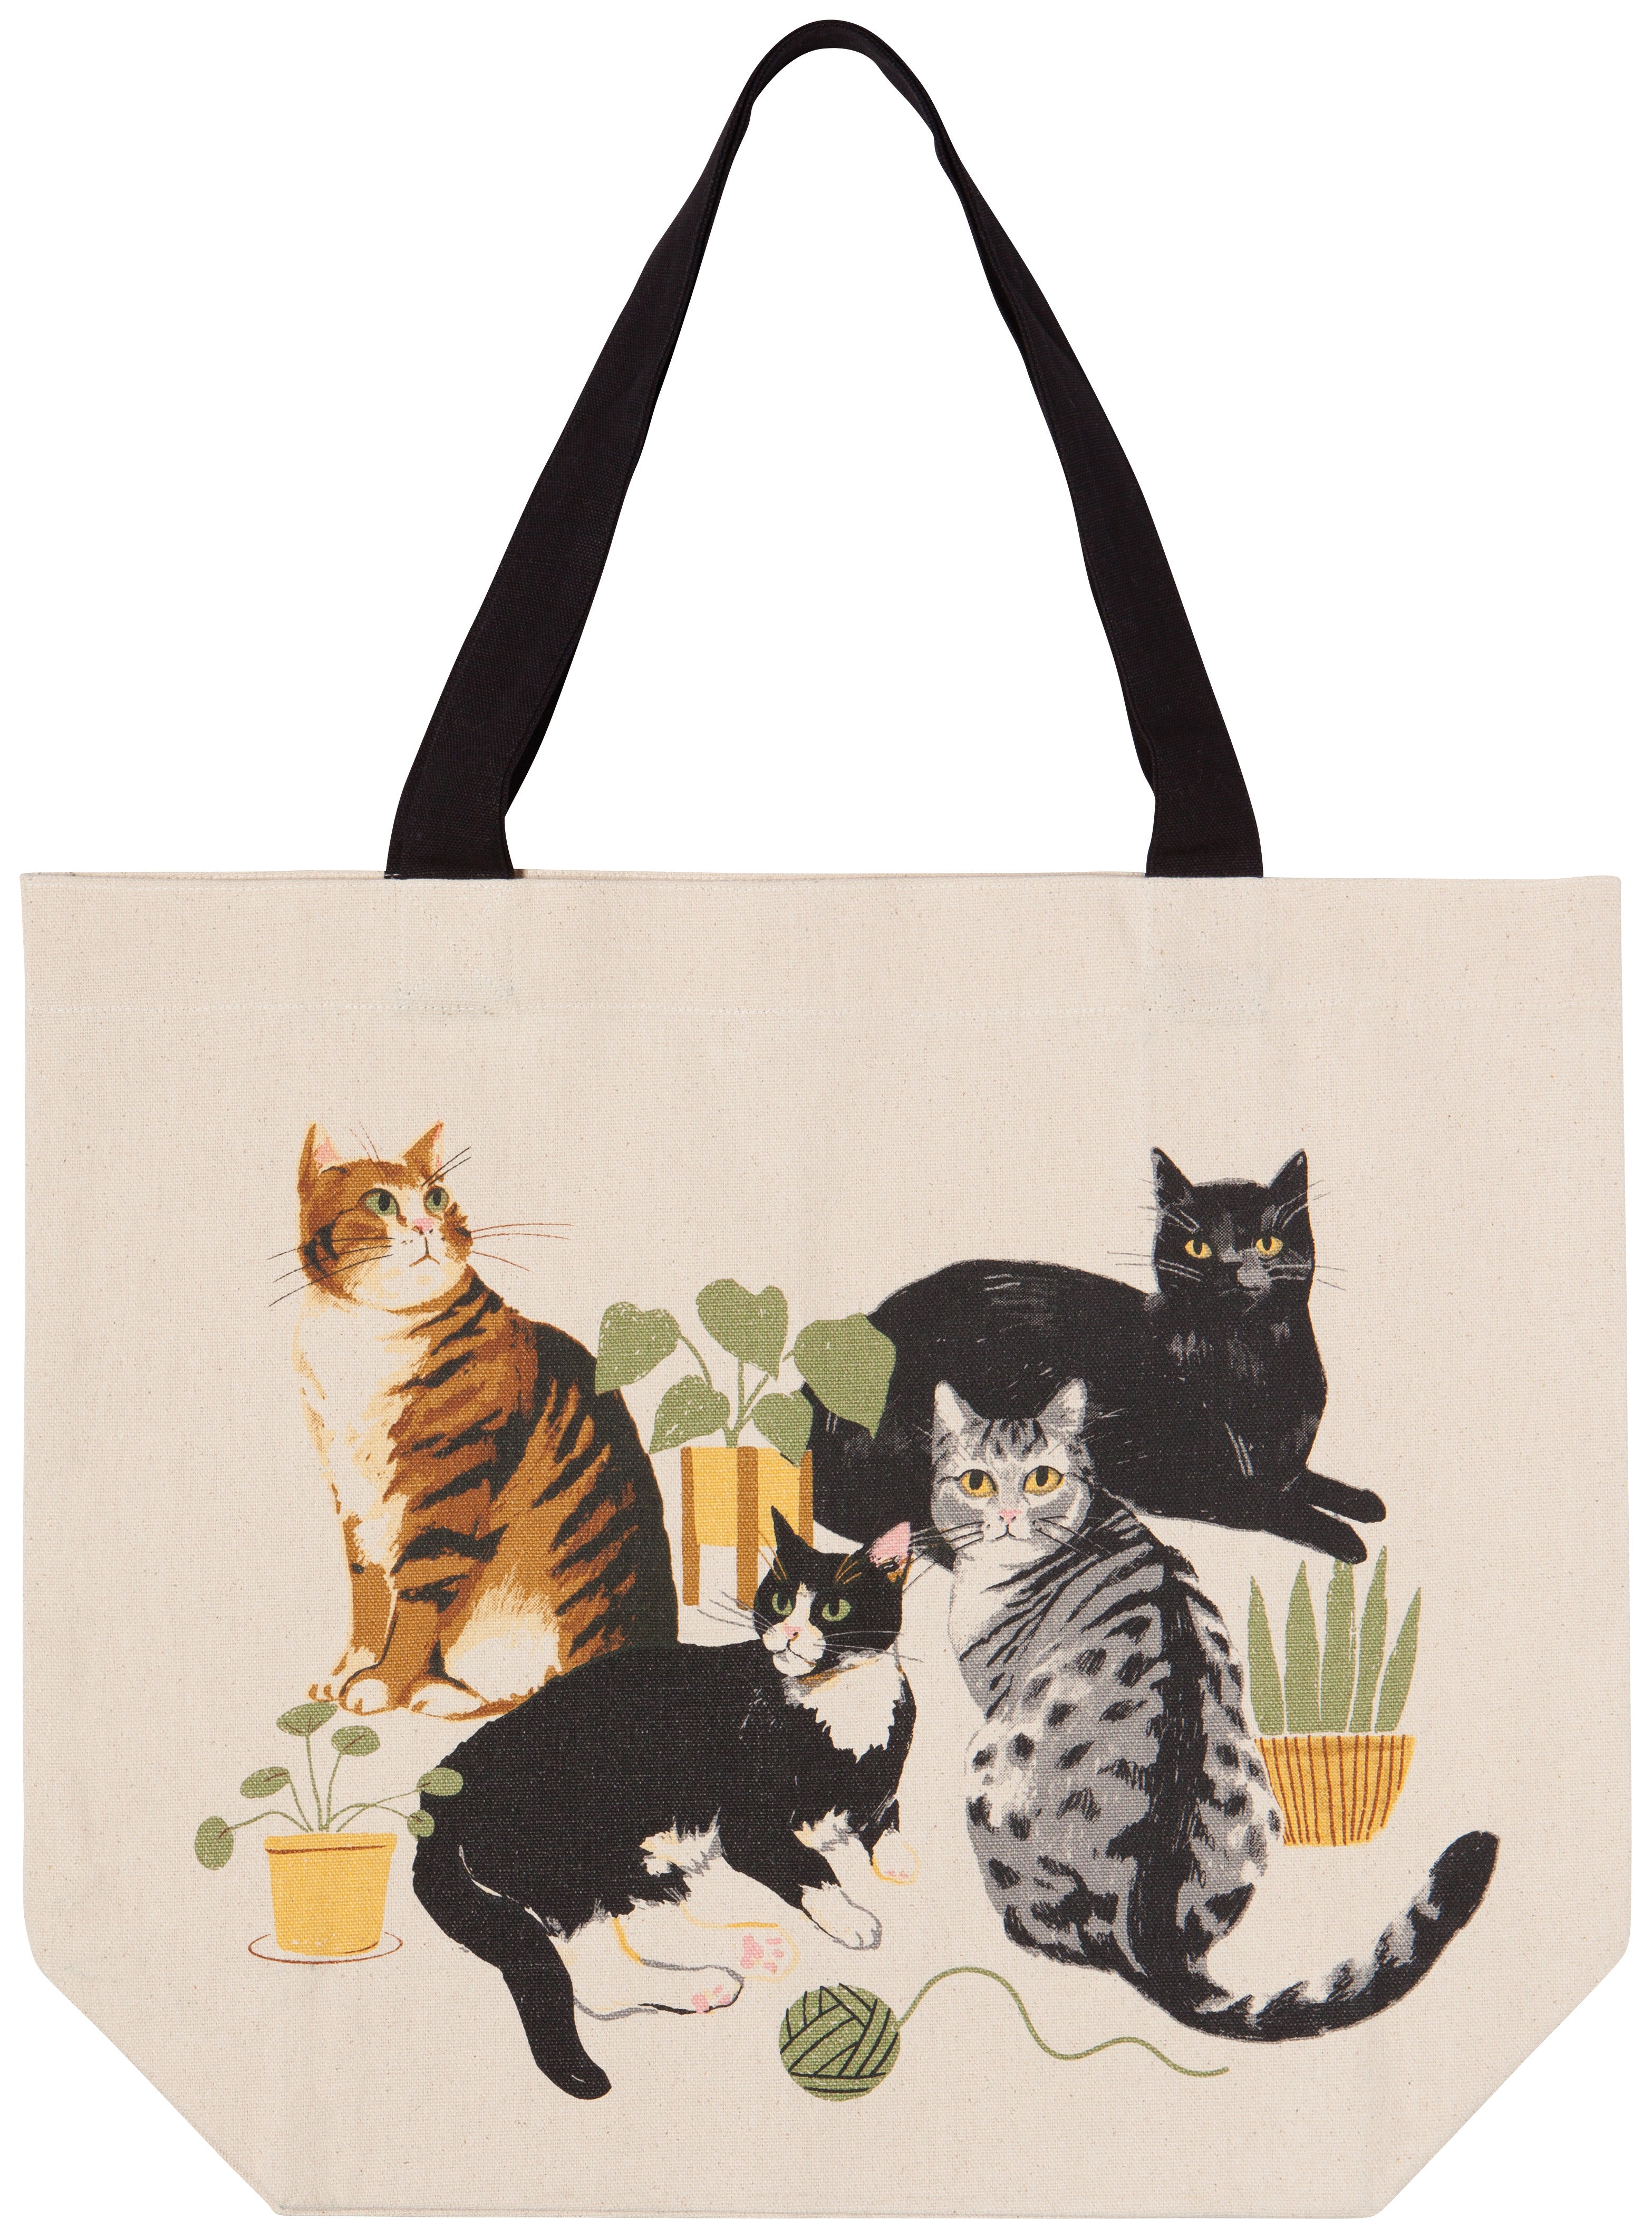 Cat Collective Tote Bag | Now Designs - Oscar & Libby's